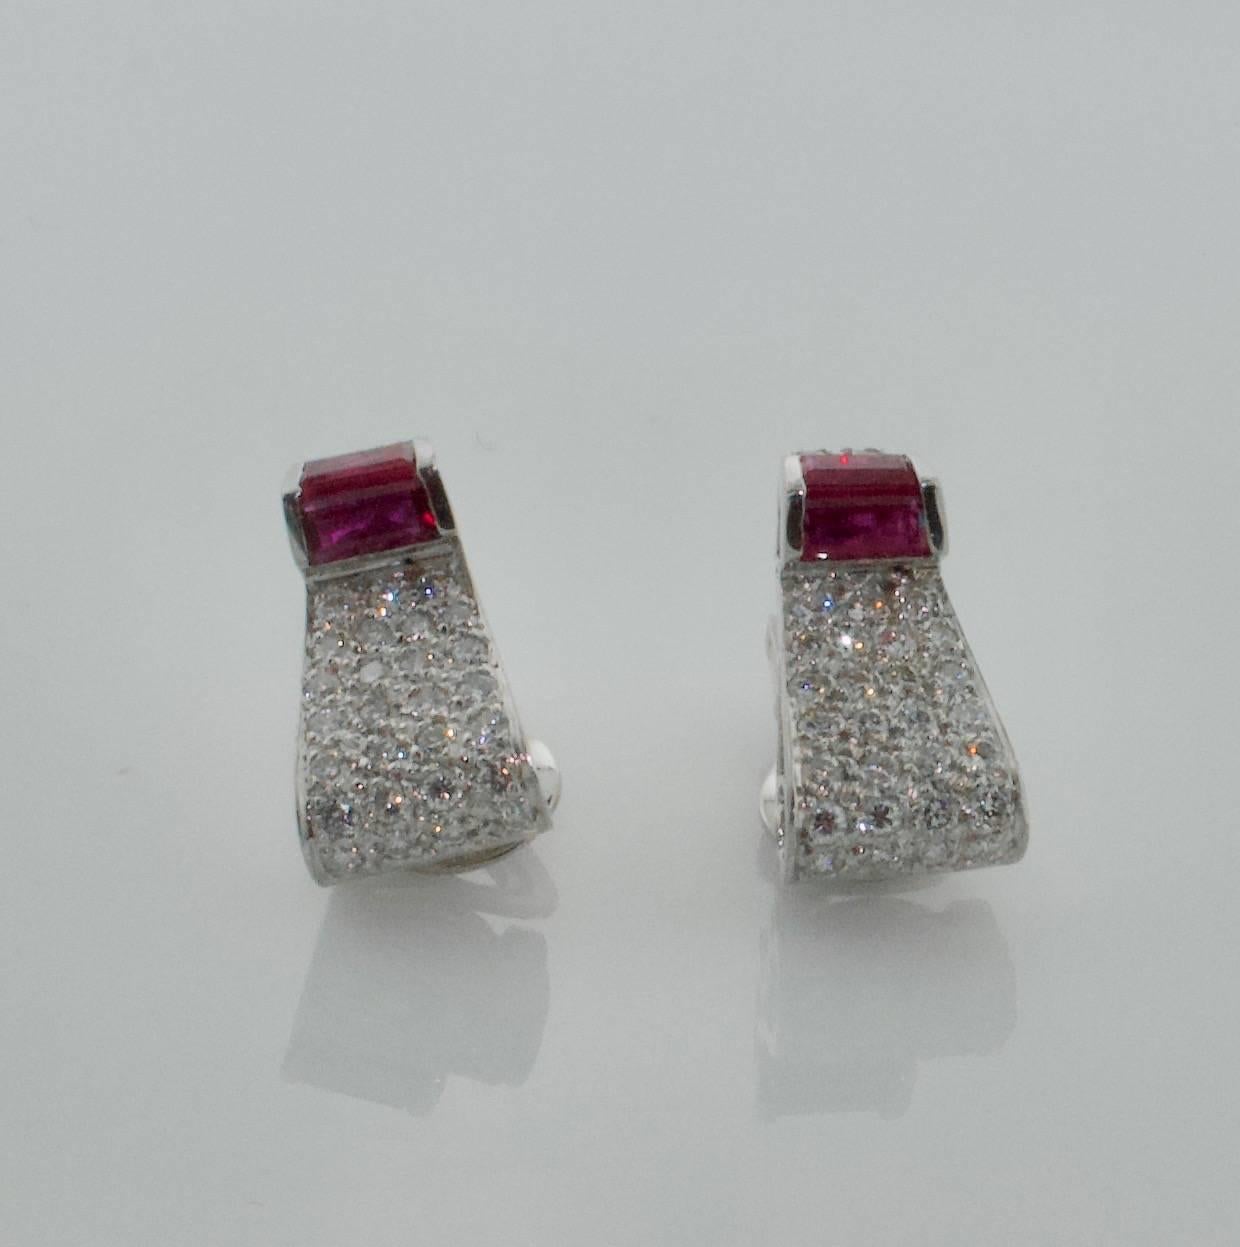 1940's Platinum and Gold Ruby and Diamond Earrings
Four baguette Cut Rubies weighing .60 carats approximately
Fifty Eight Round Brilliant Cut Diamonds weighing 1.70 carats approximately GH VVS-VS
Clip Backs are 18k White Gold with France Eagle